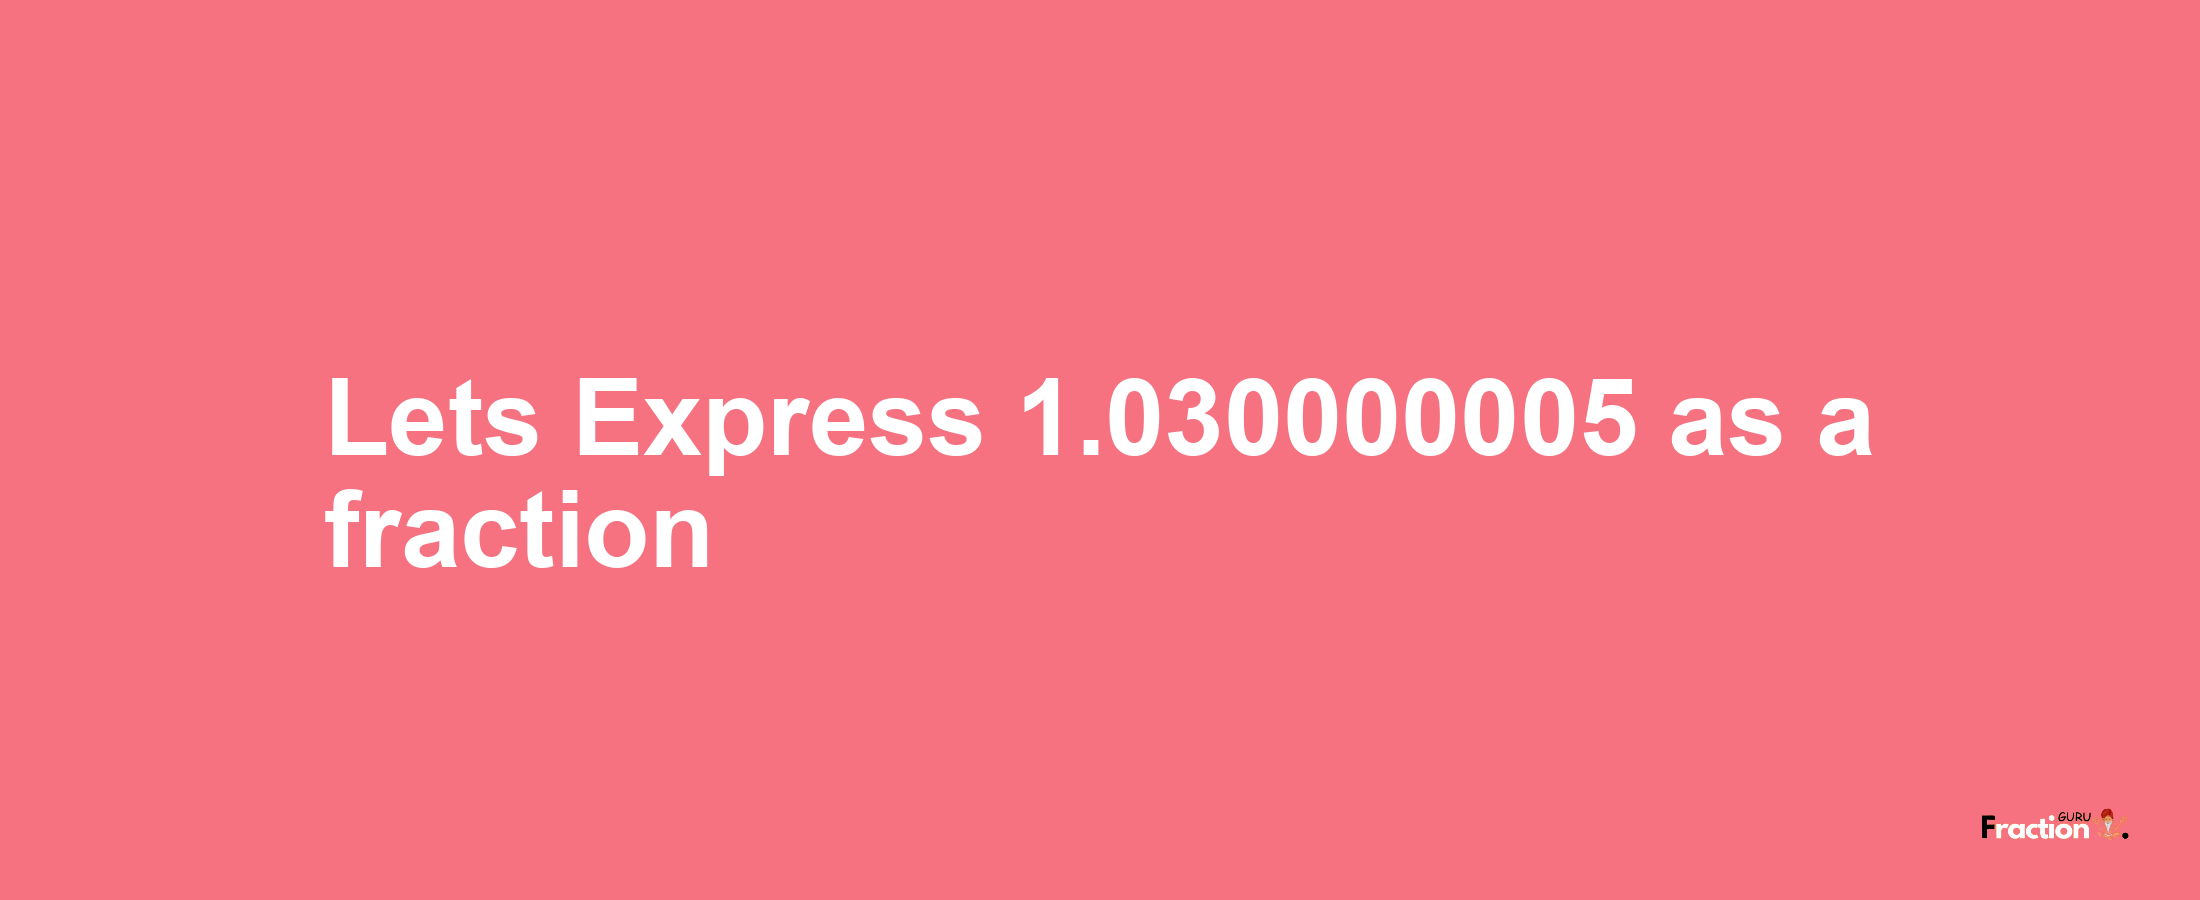 Lets Express 1.030000005 as afraction